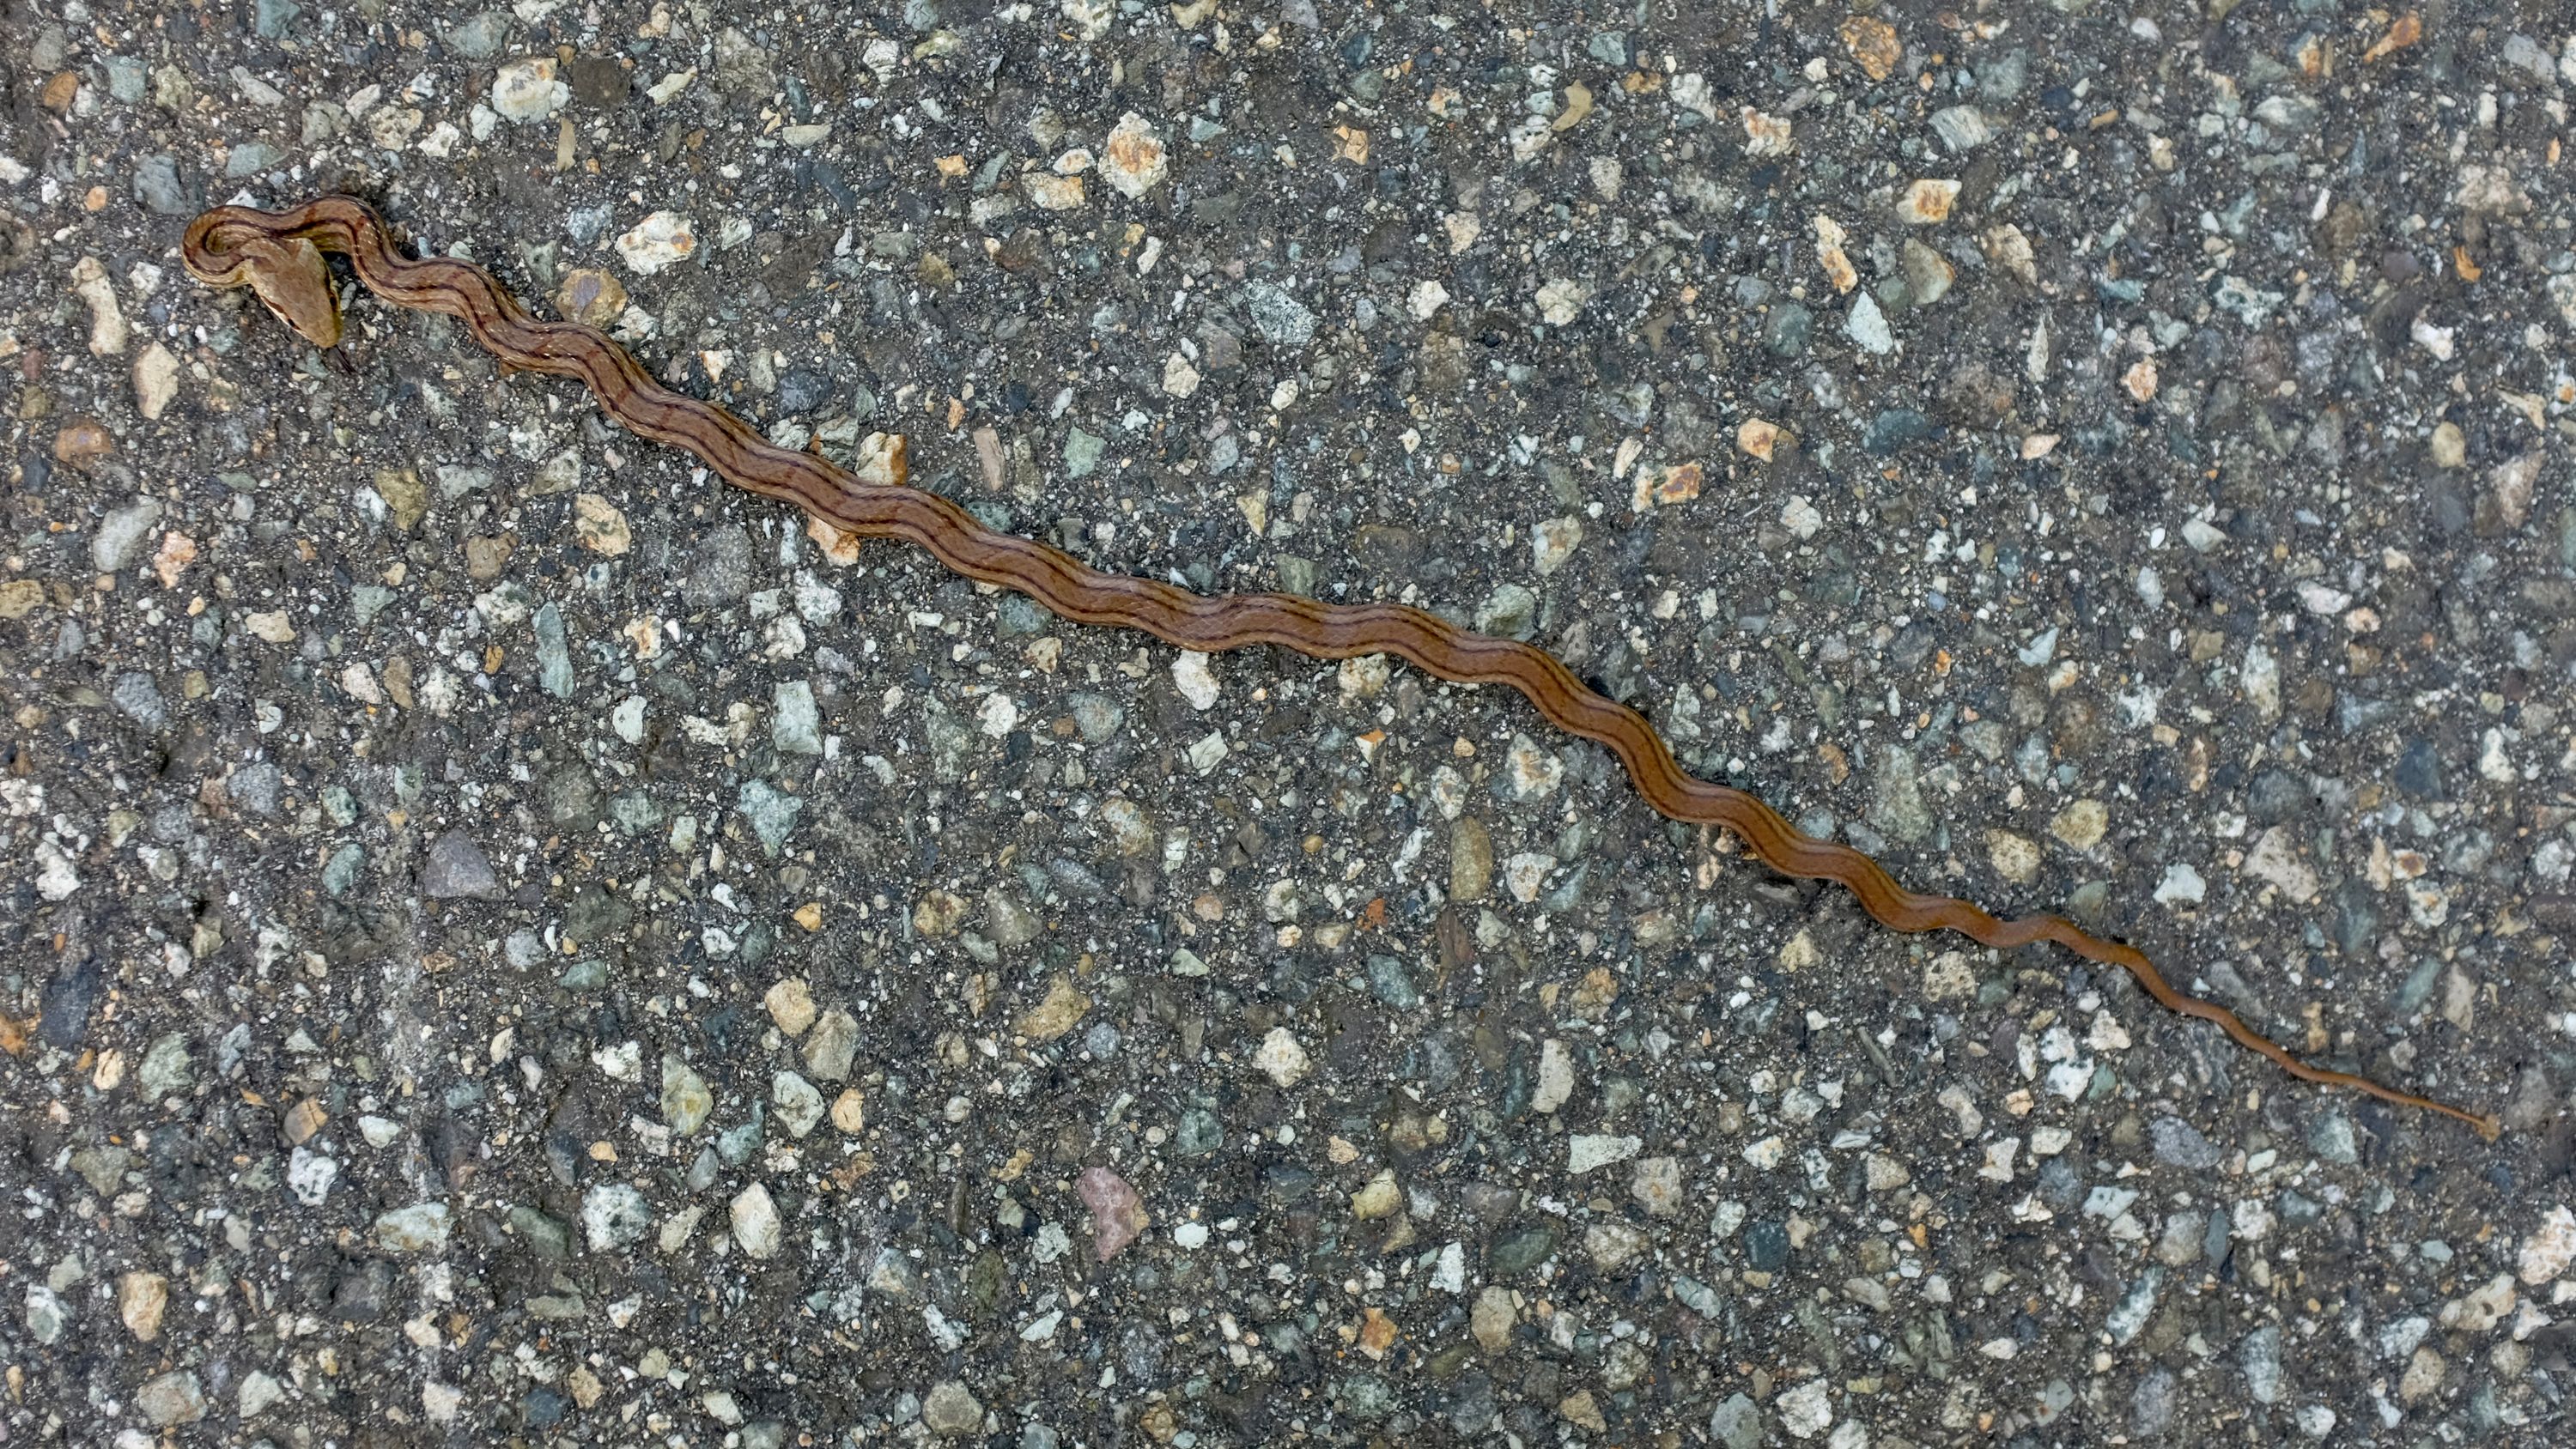 A Japanese striped snake forms a sine wave with its body on the asphalt.